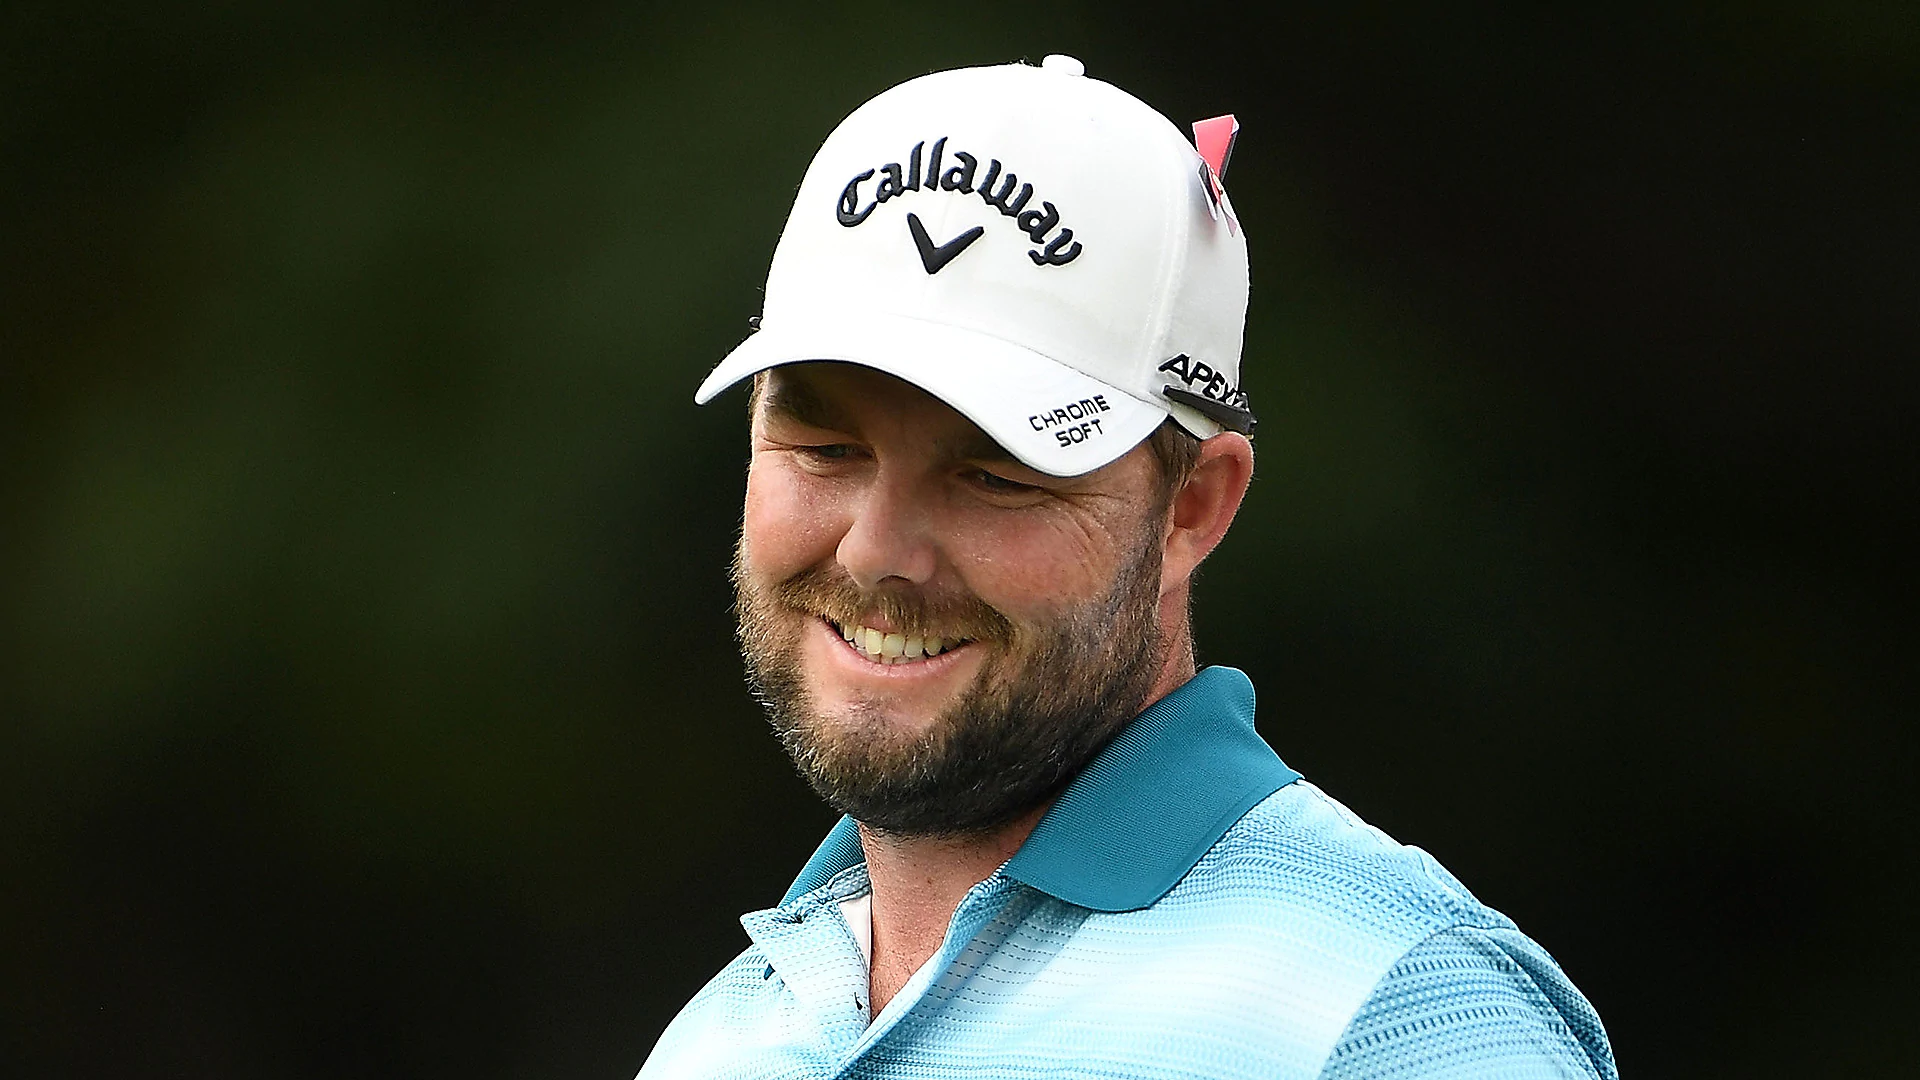 It took 7 years, but Leishman is back at East Lake